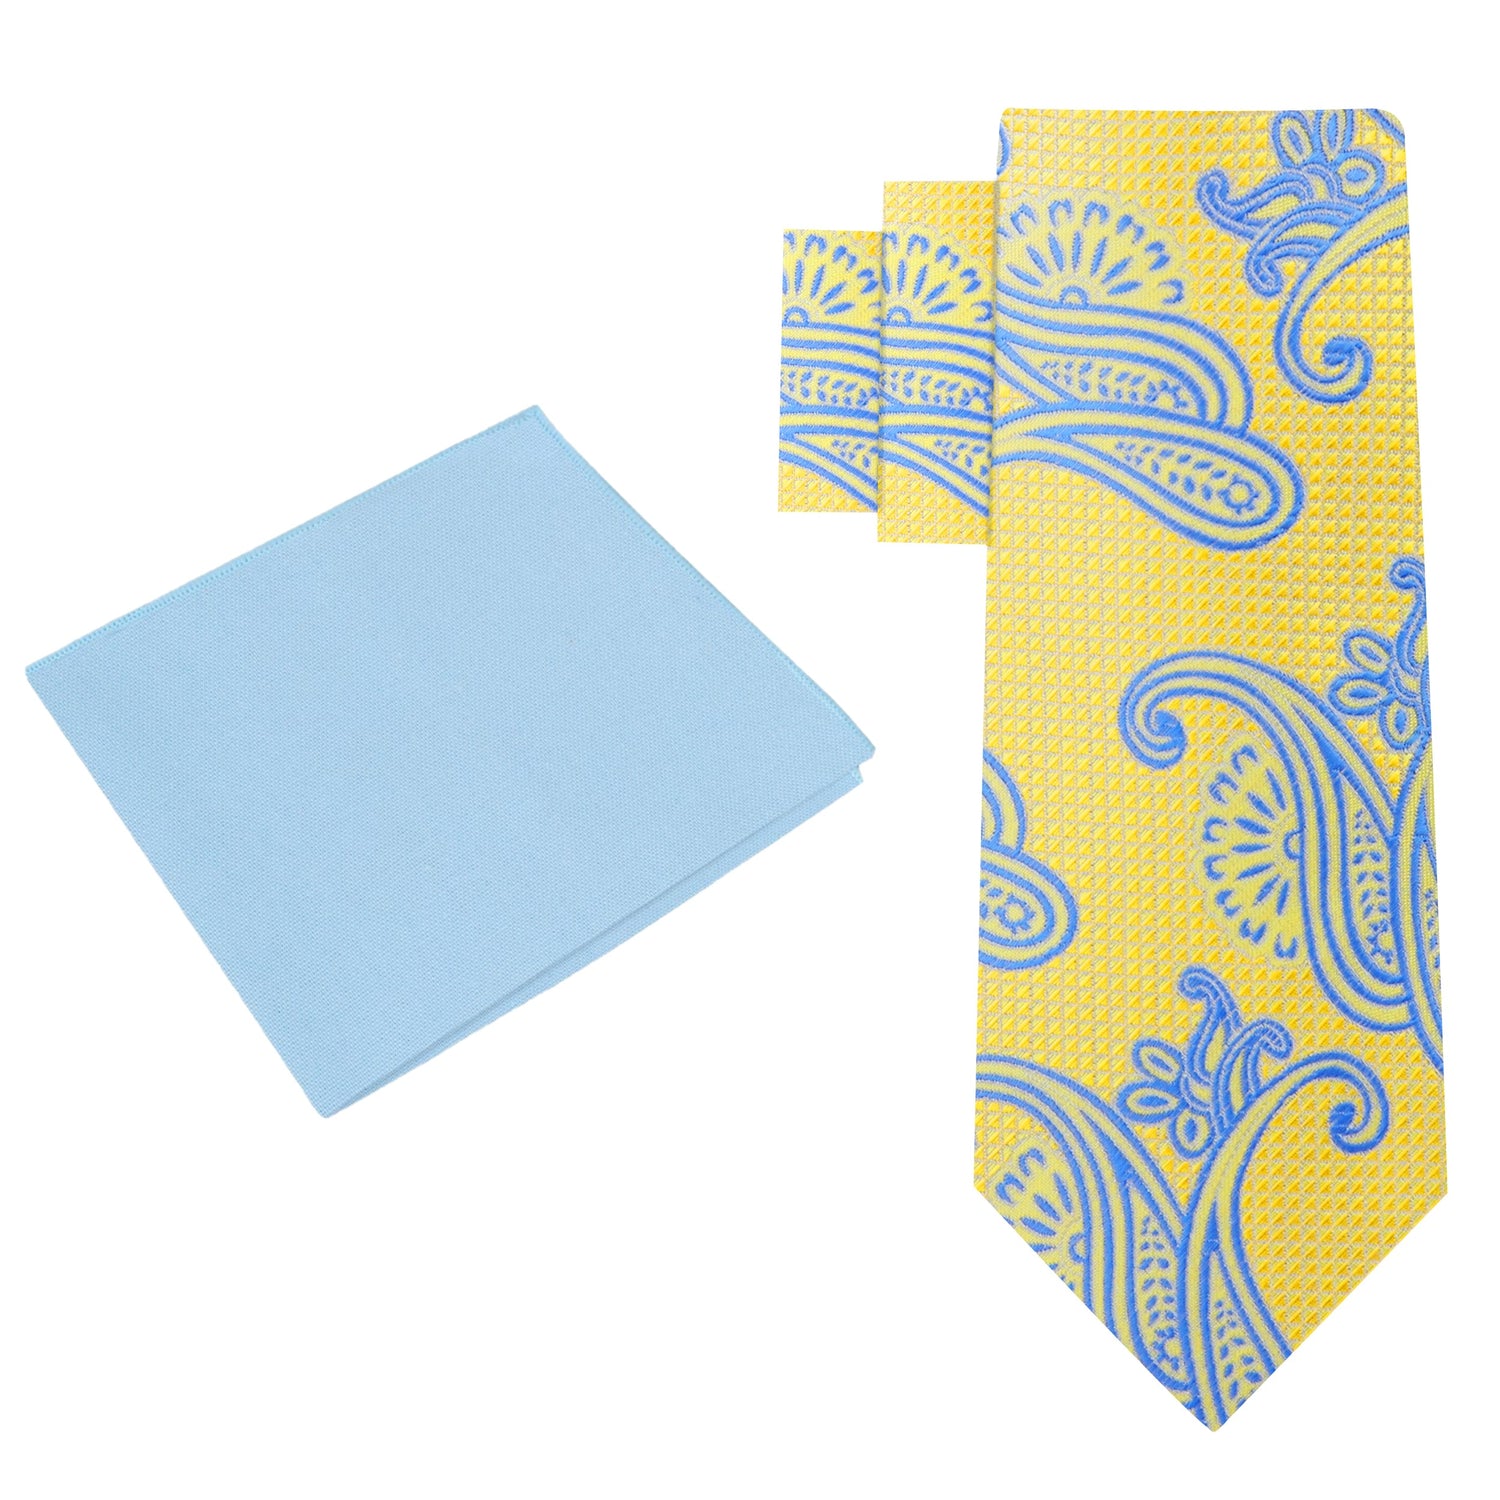 Alt View: Yellow and Light Blue Paisley Tie and Light Blue Square